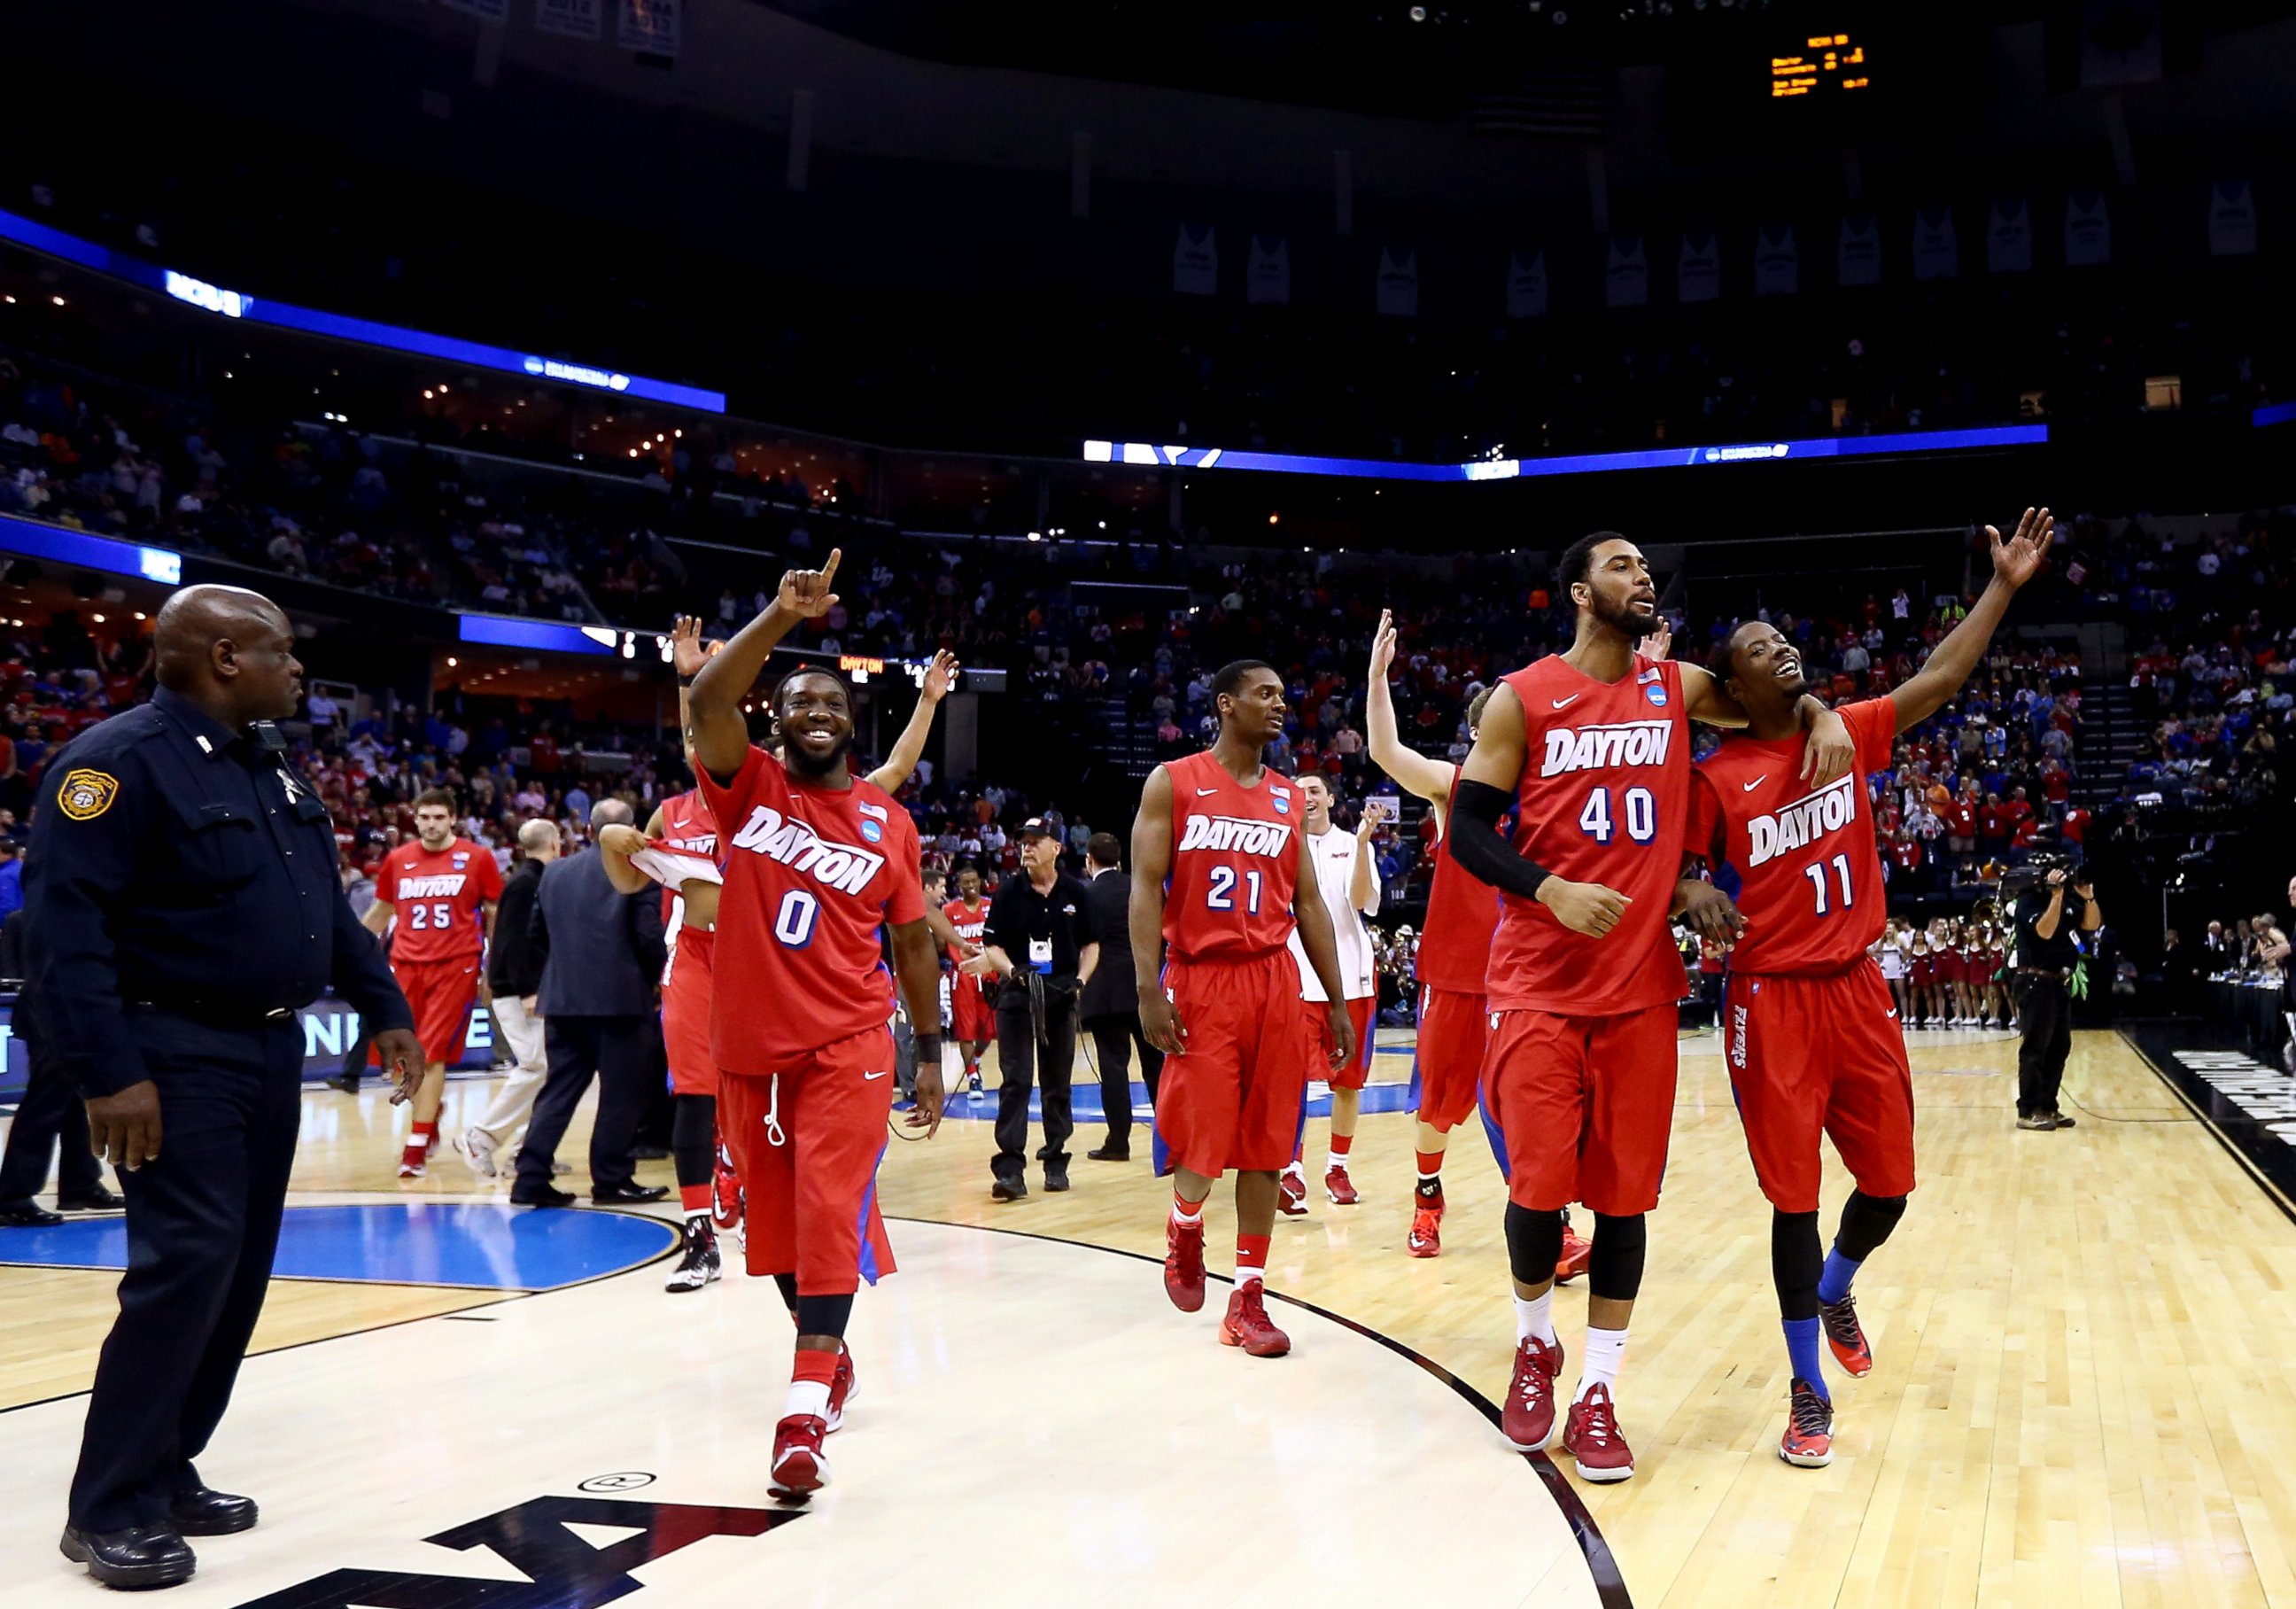 PHOTO: The Dayton Flyers walk off the floor after defeating the Stanford Cardinal in a regional semifinal of the 2014 NCAA Men's Basketball Tournament on March 27, 2014 in Memphis, Tenn. 